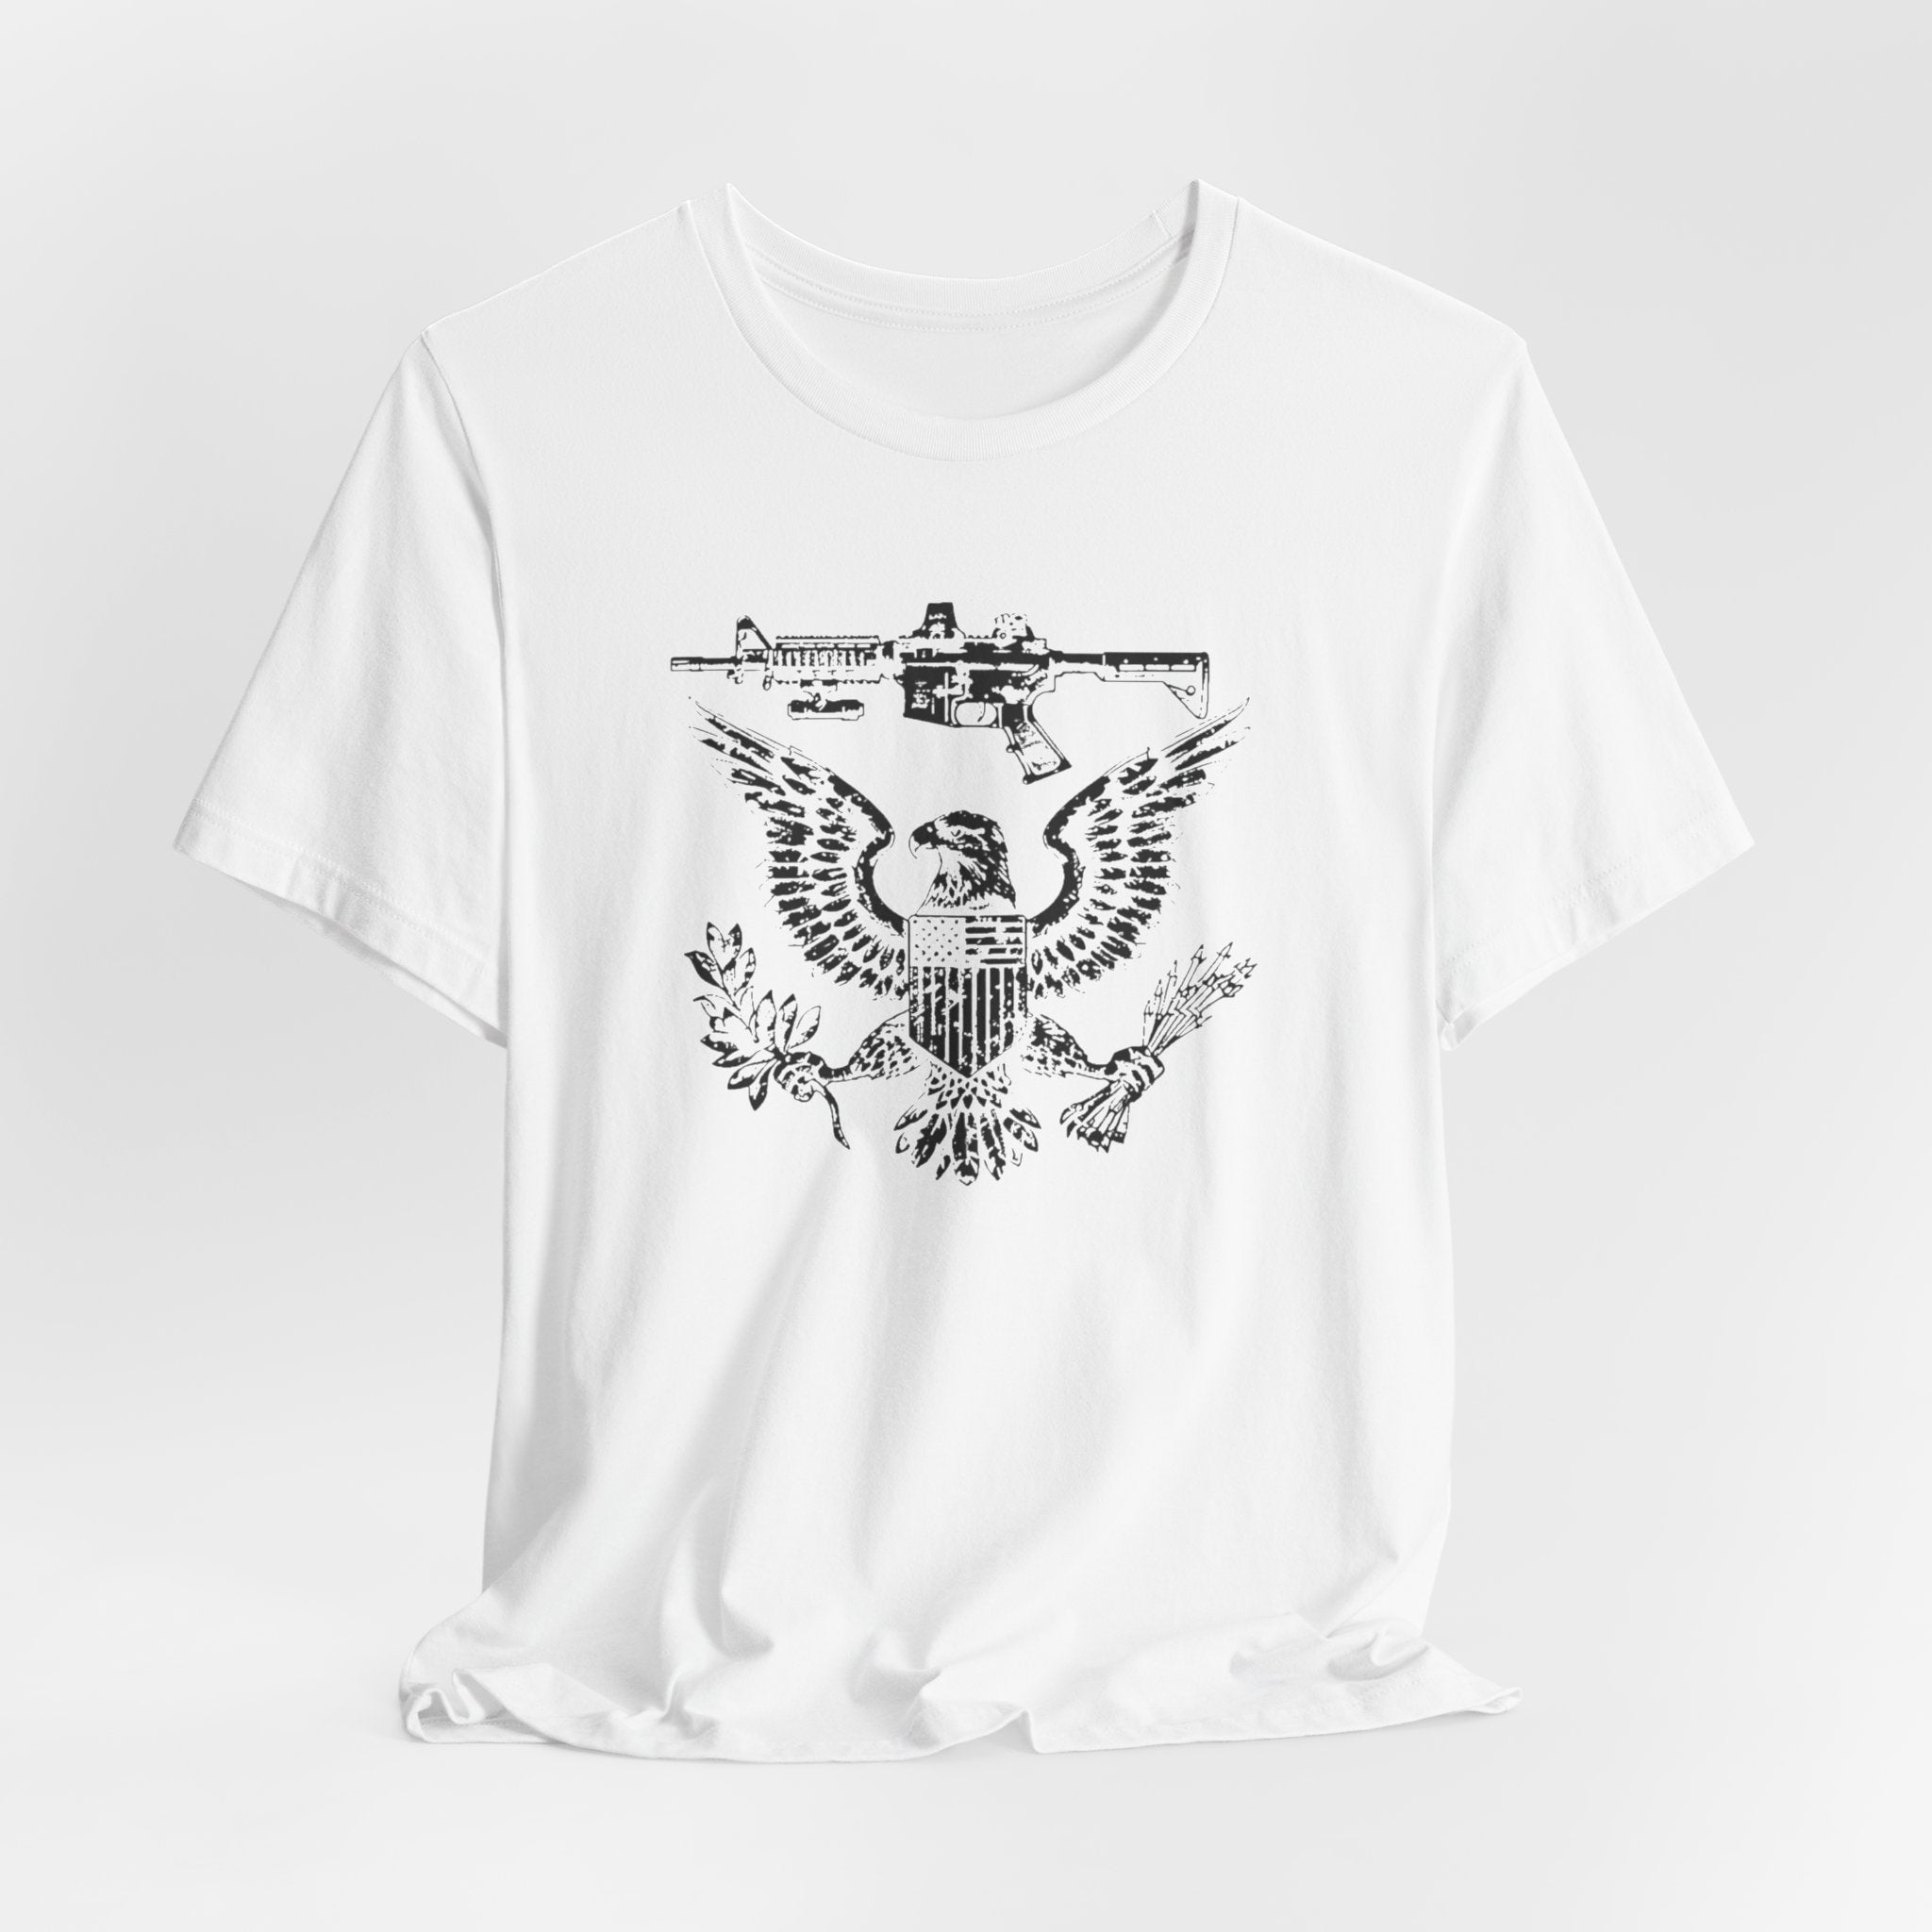 Patriotic Eagle and Rifle T-Shirt, American Flag Inspired Military Graphic Tee, Bold Eagle & Rifle Design, Proud USA Themed Apparel Unisex Jersey Short Sleeve Tee